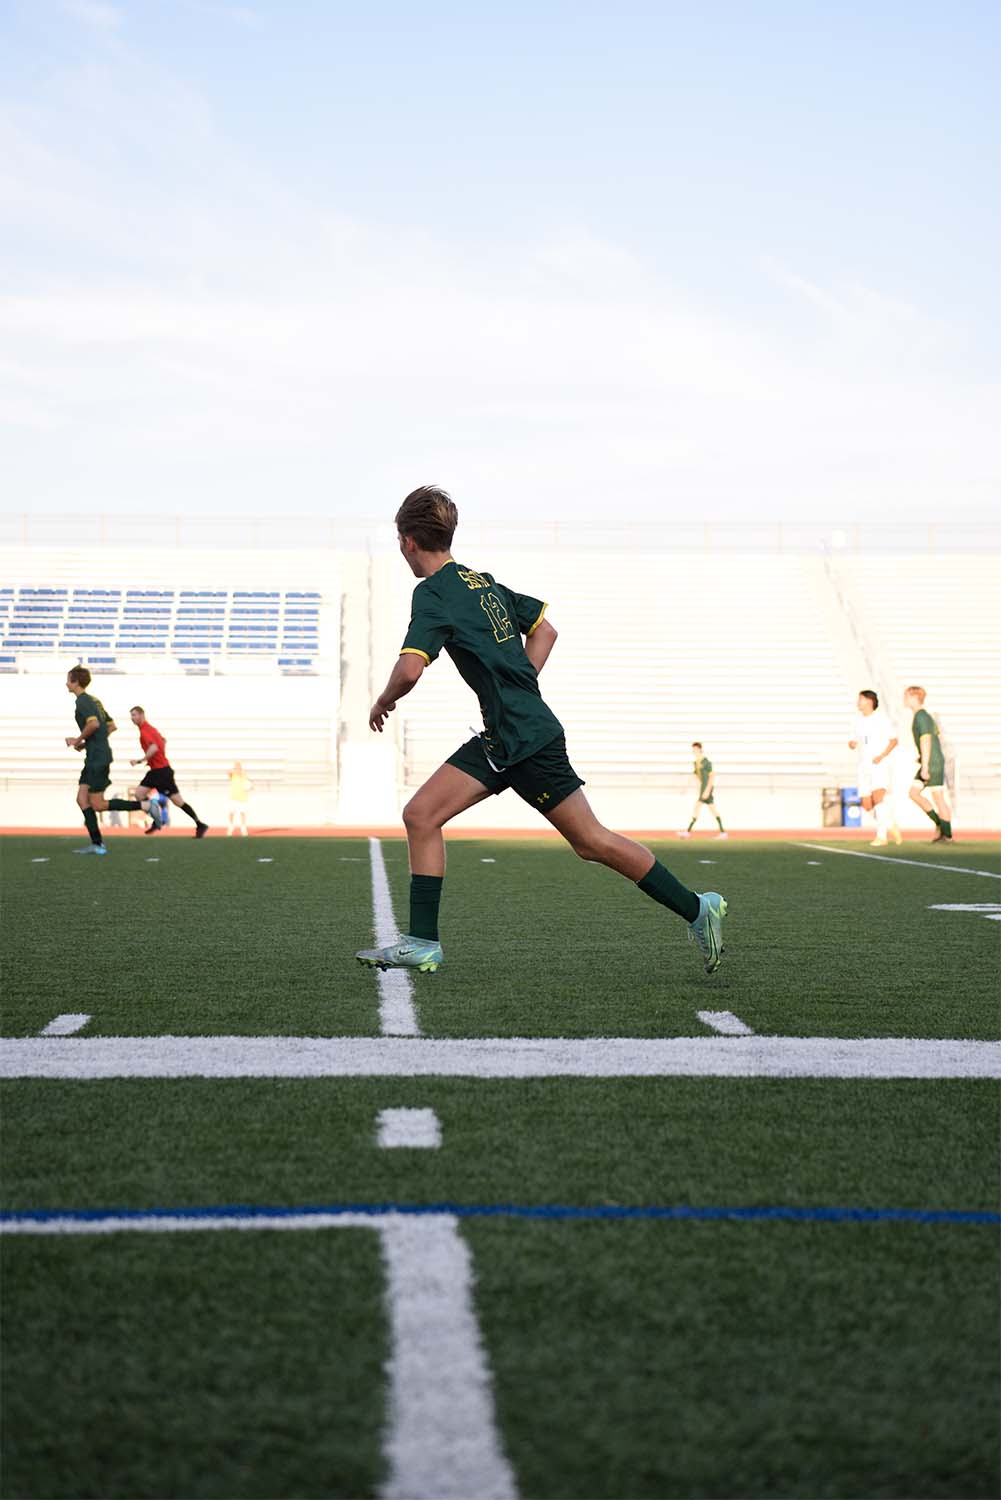 Running across midfield, junior Graham Ziegler waits for a pass during the varsity game against Sumner Academy.